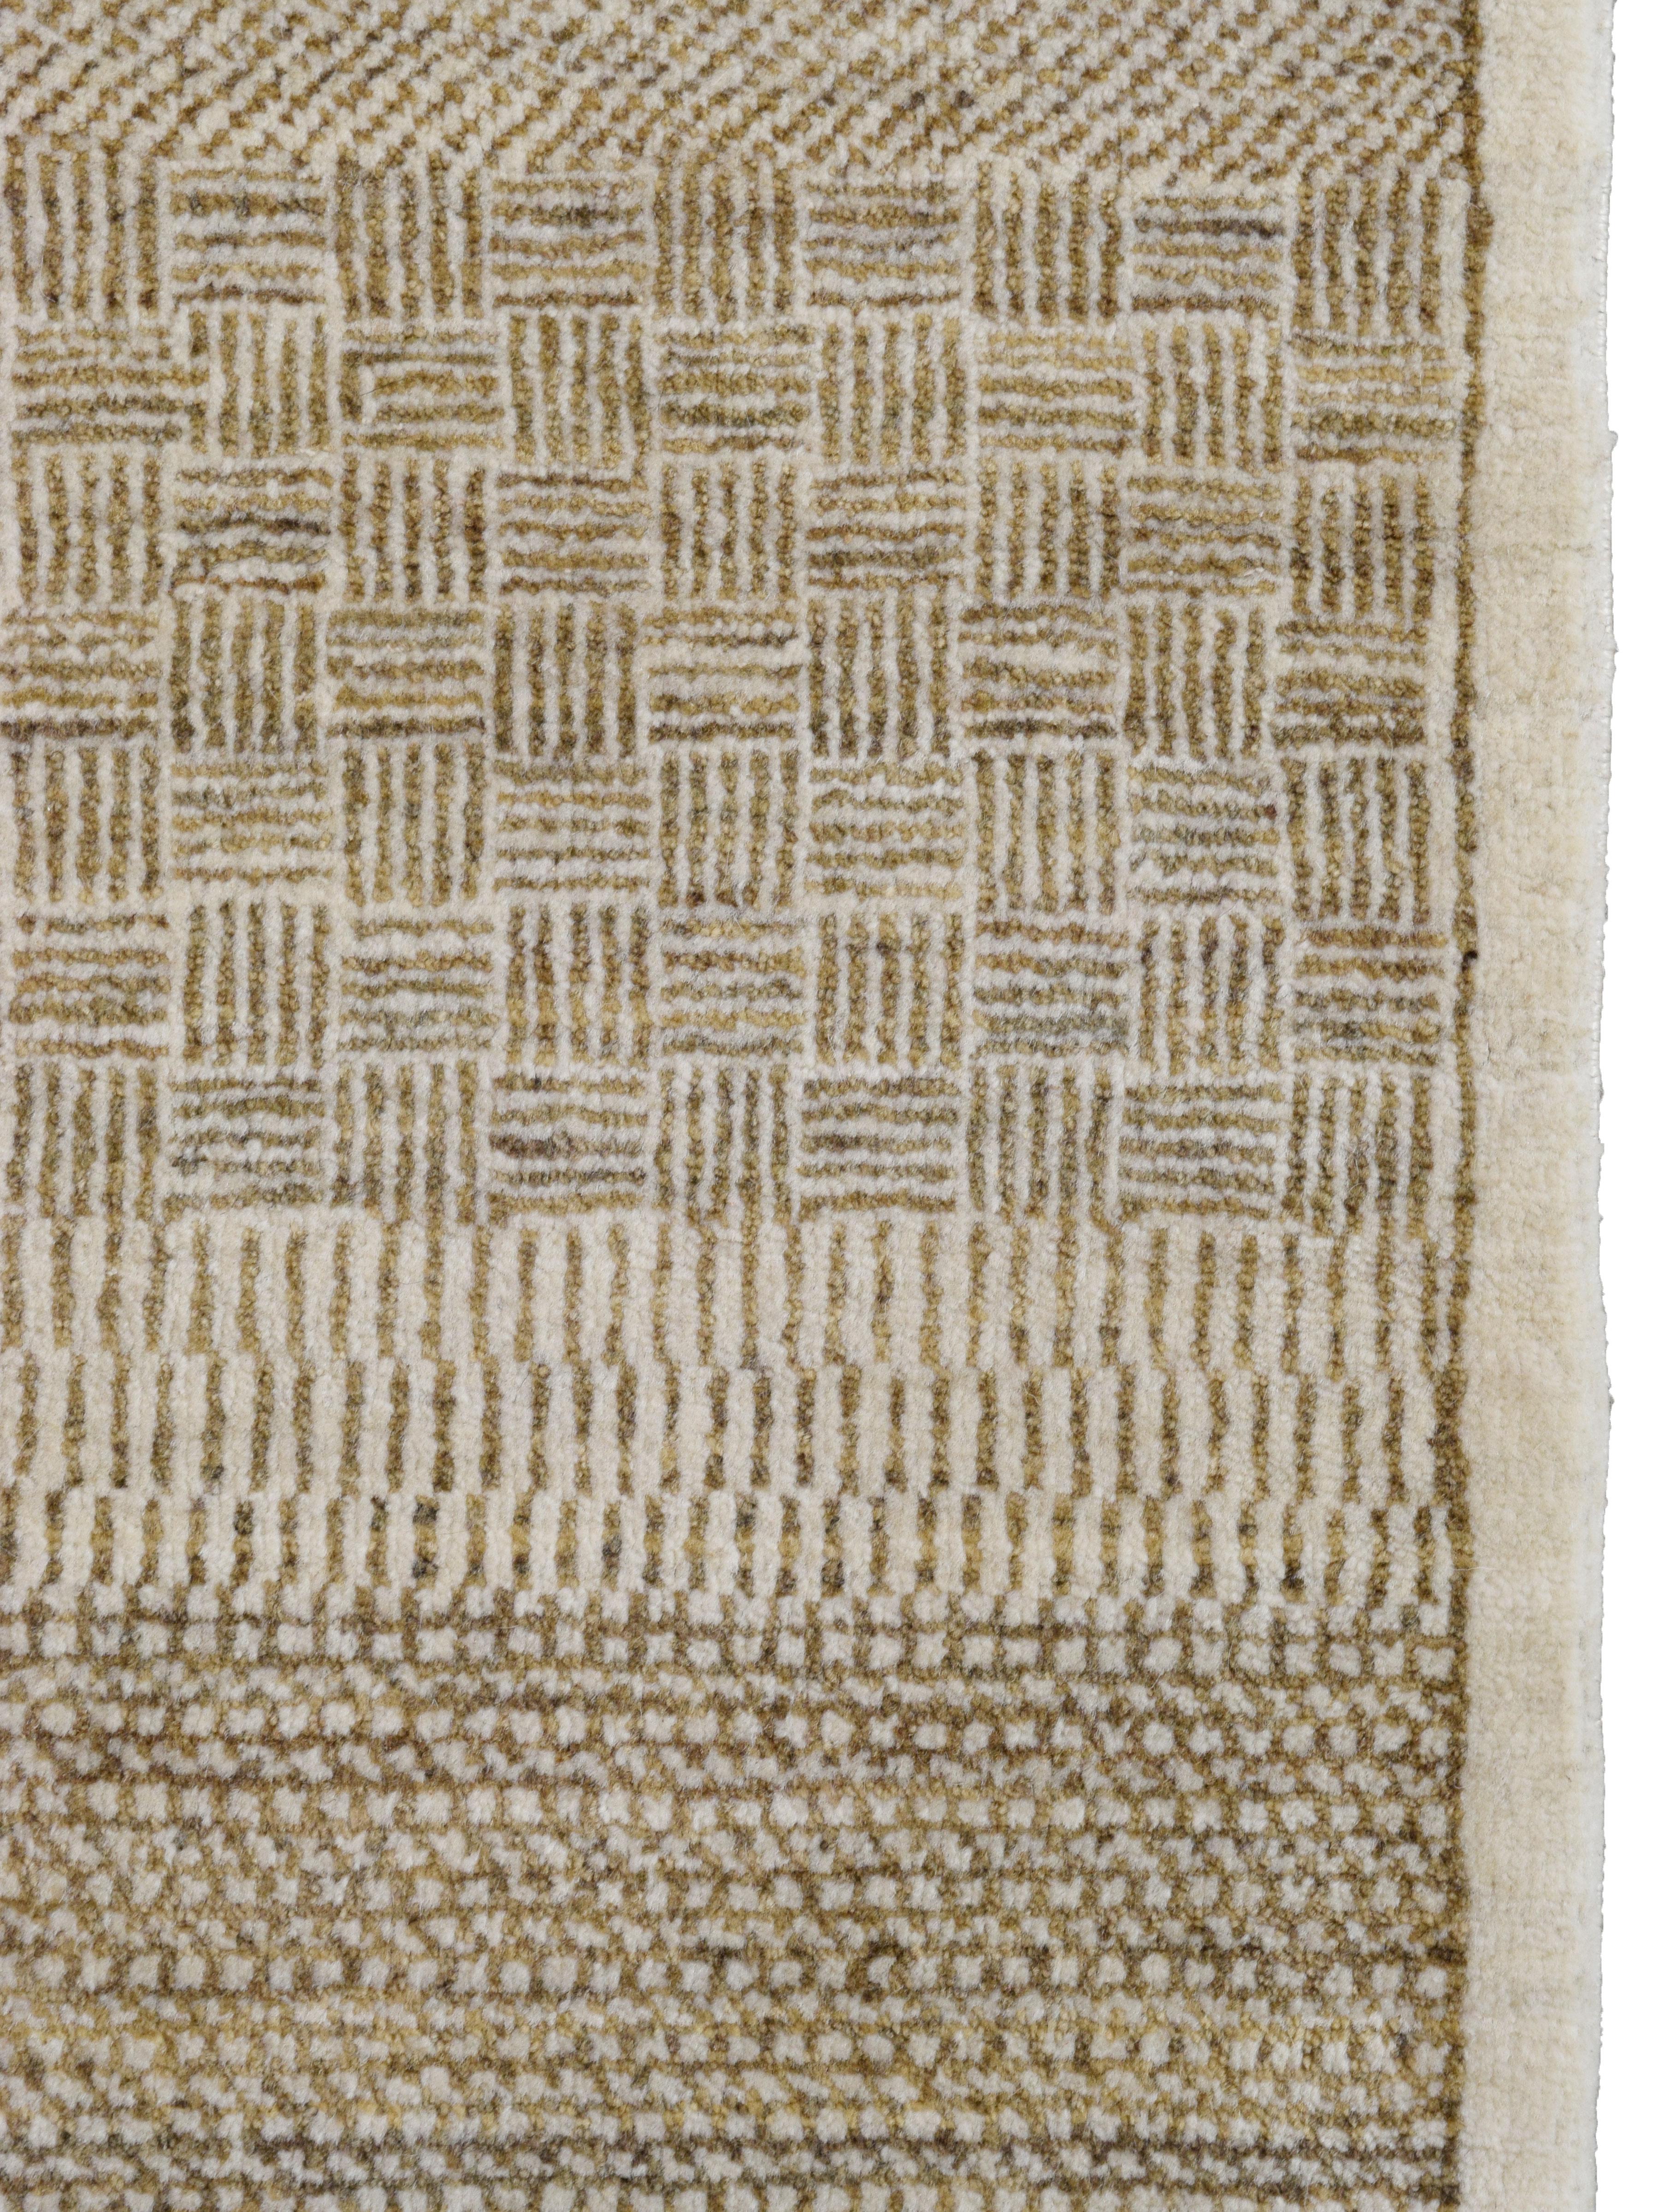 Vegetable Dyed Brown and Cream Modern Persian Area Rug from Orley Shabahang, 5 x 7 For Sale